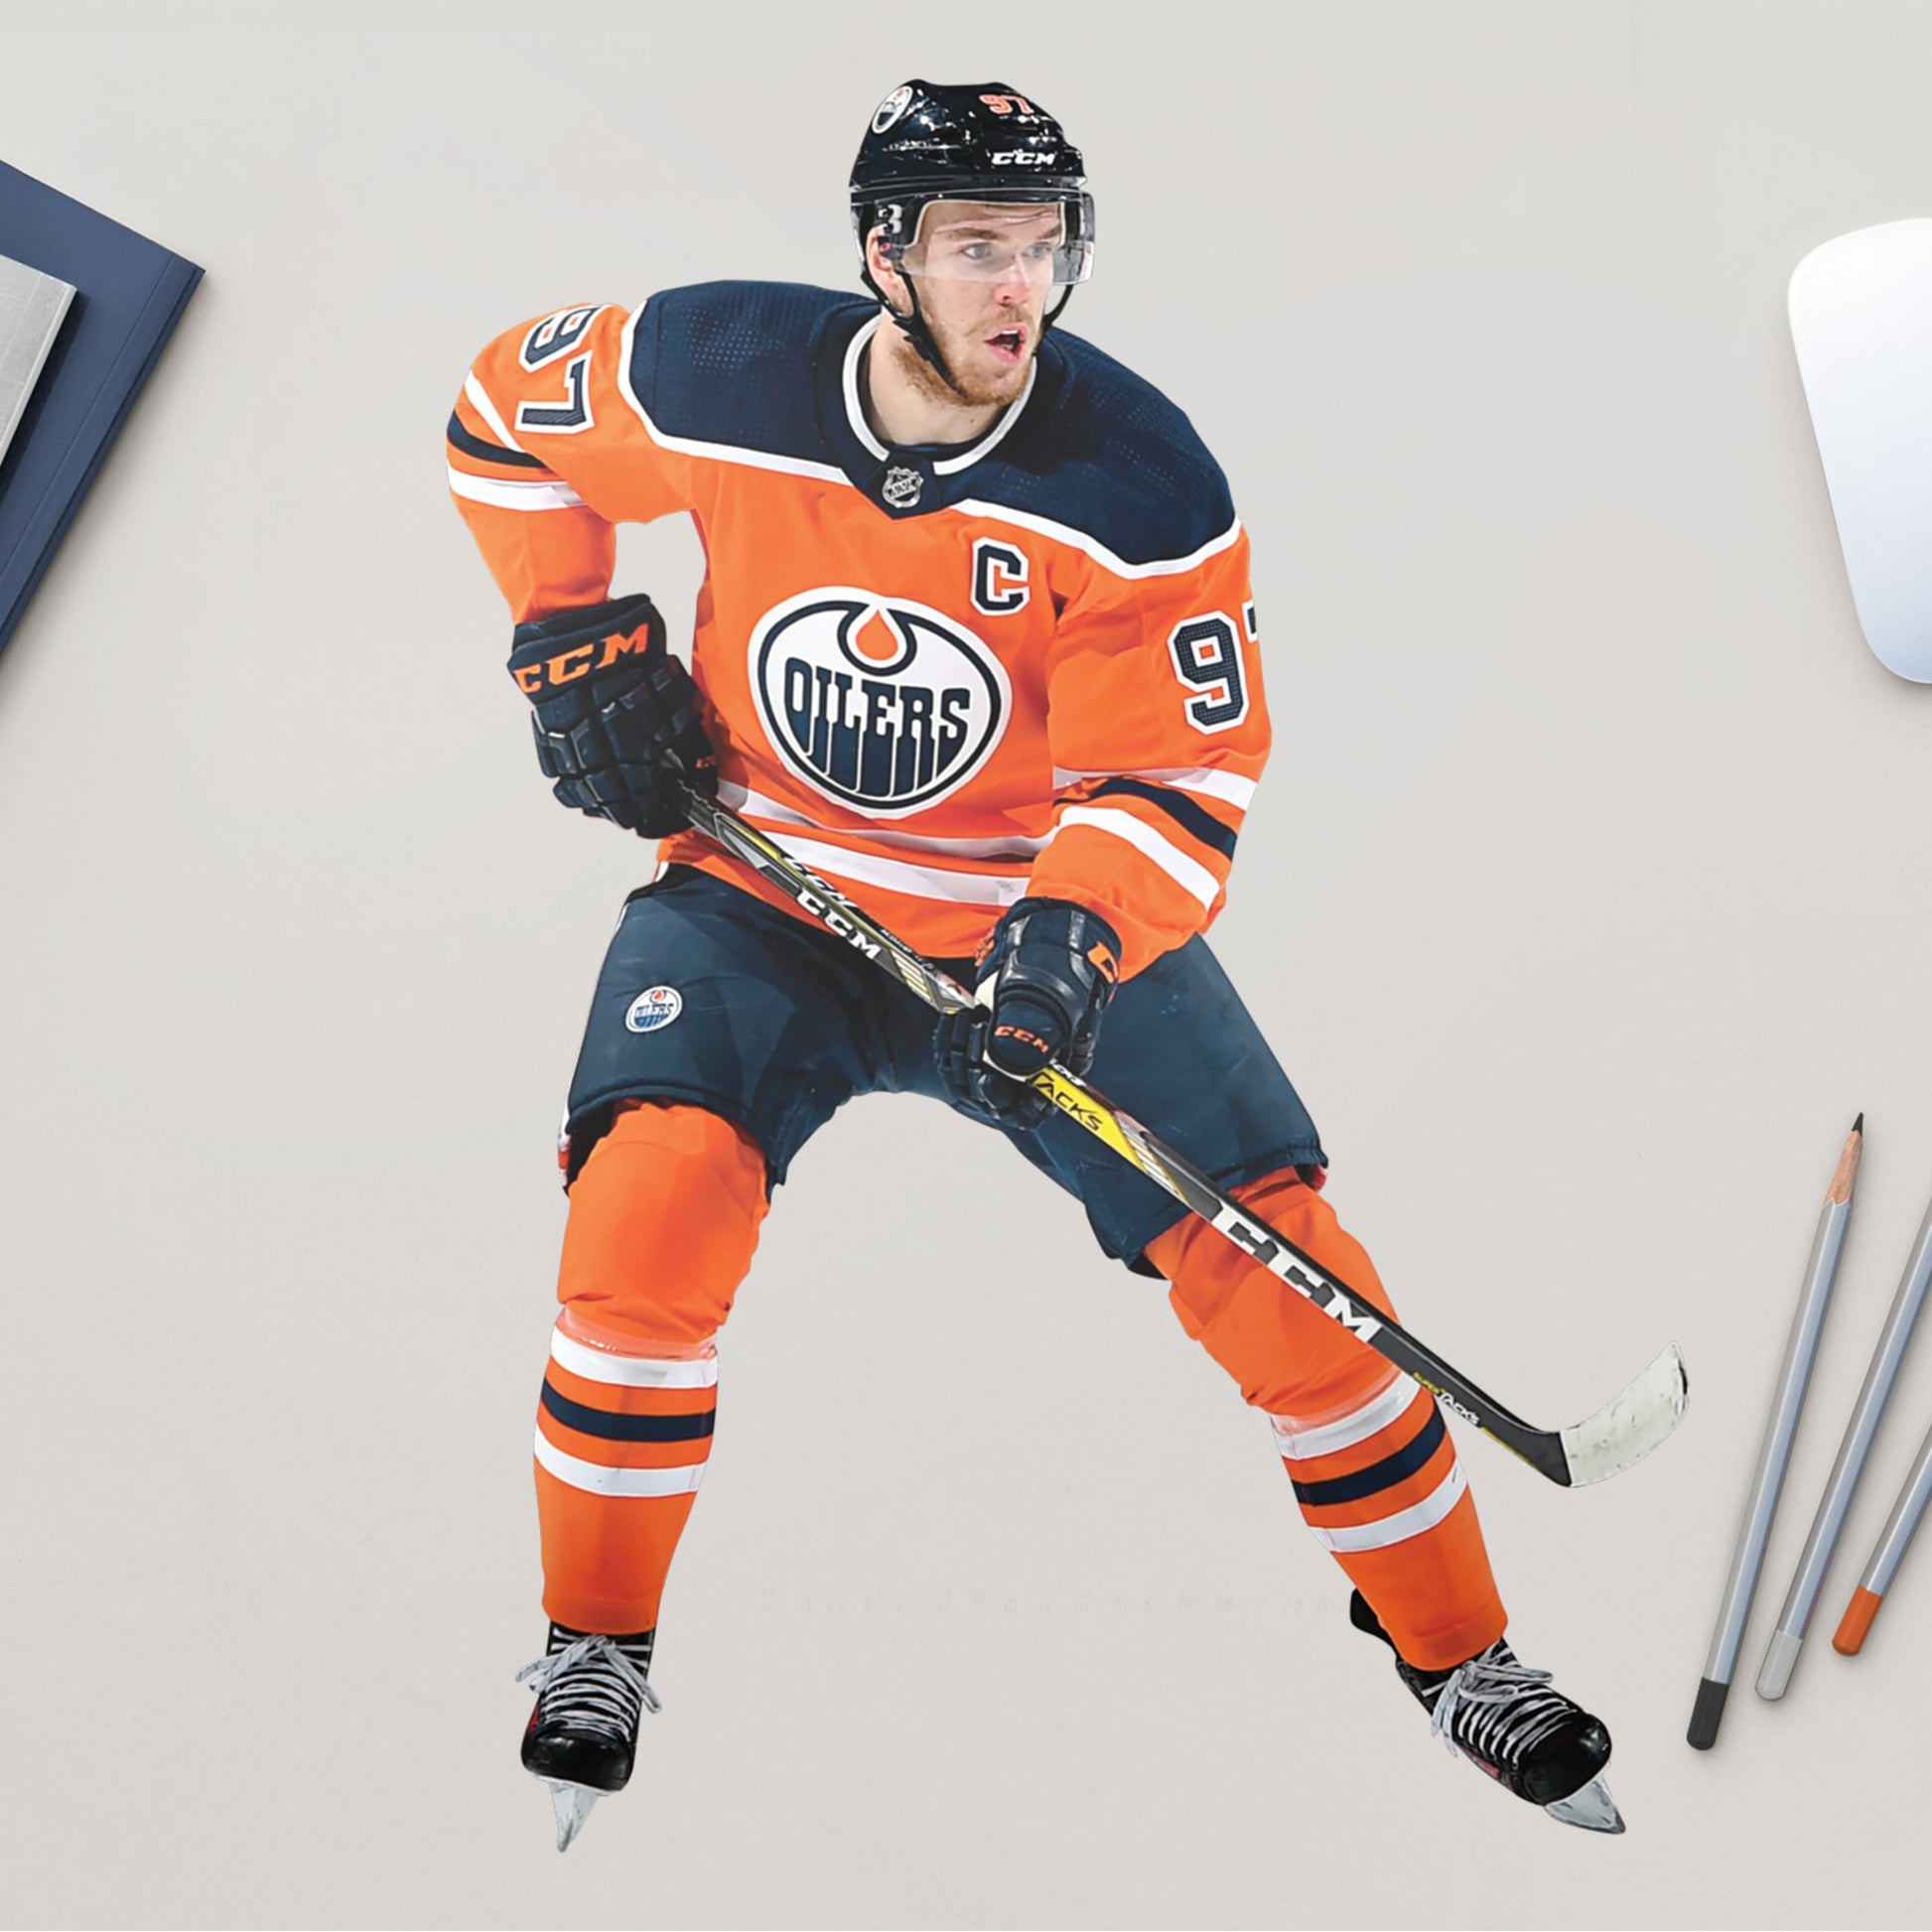 McDavid presented with Oilers' new third orange jersey